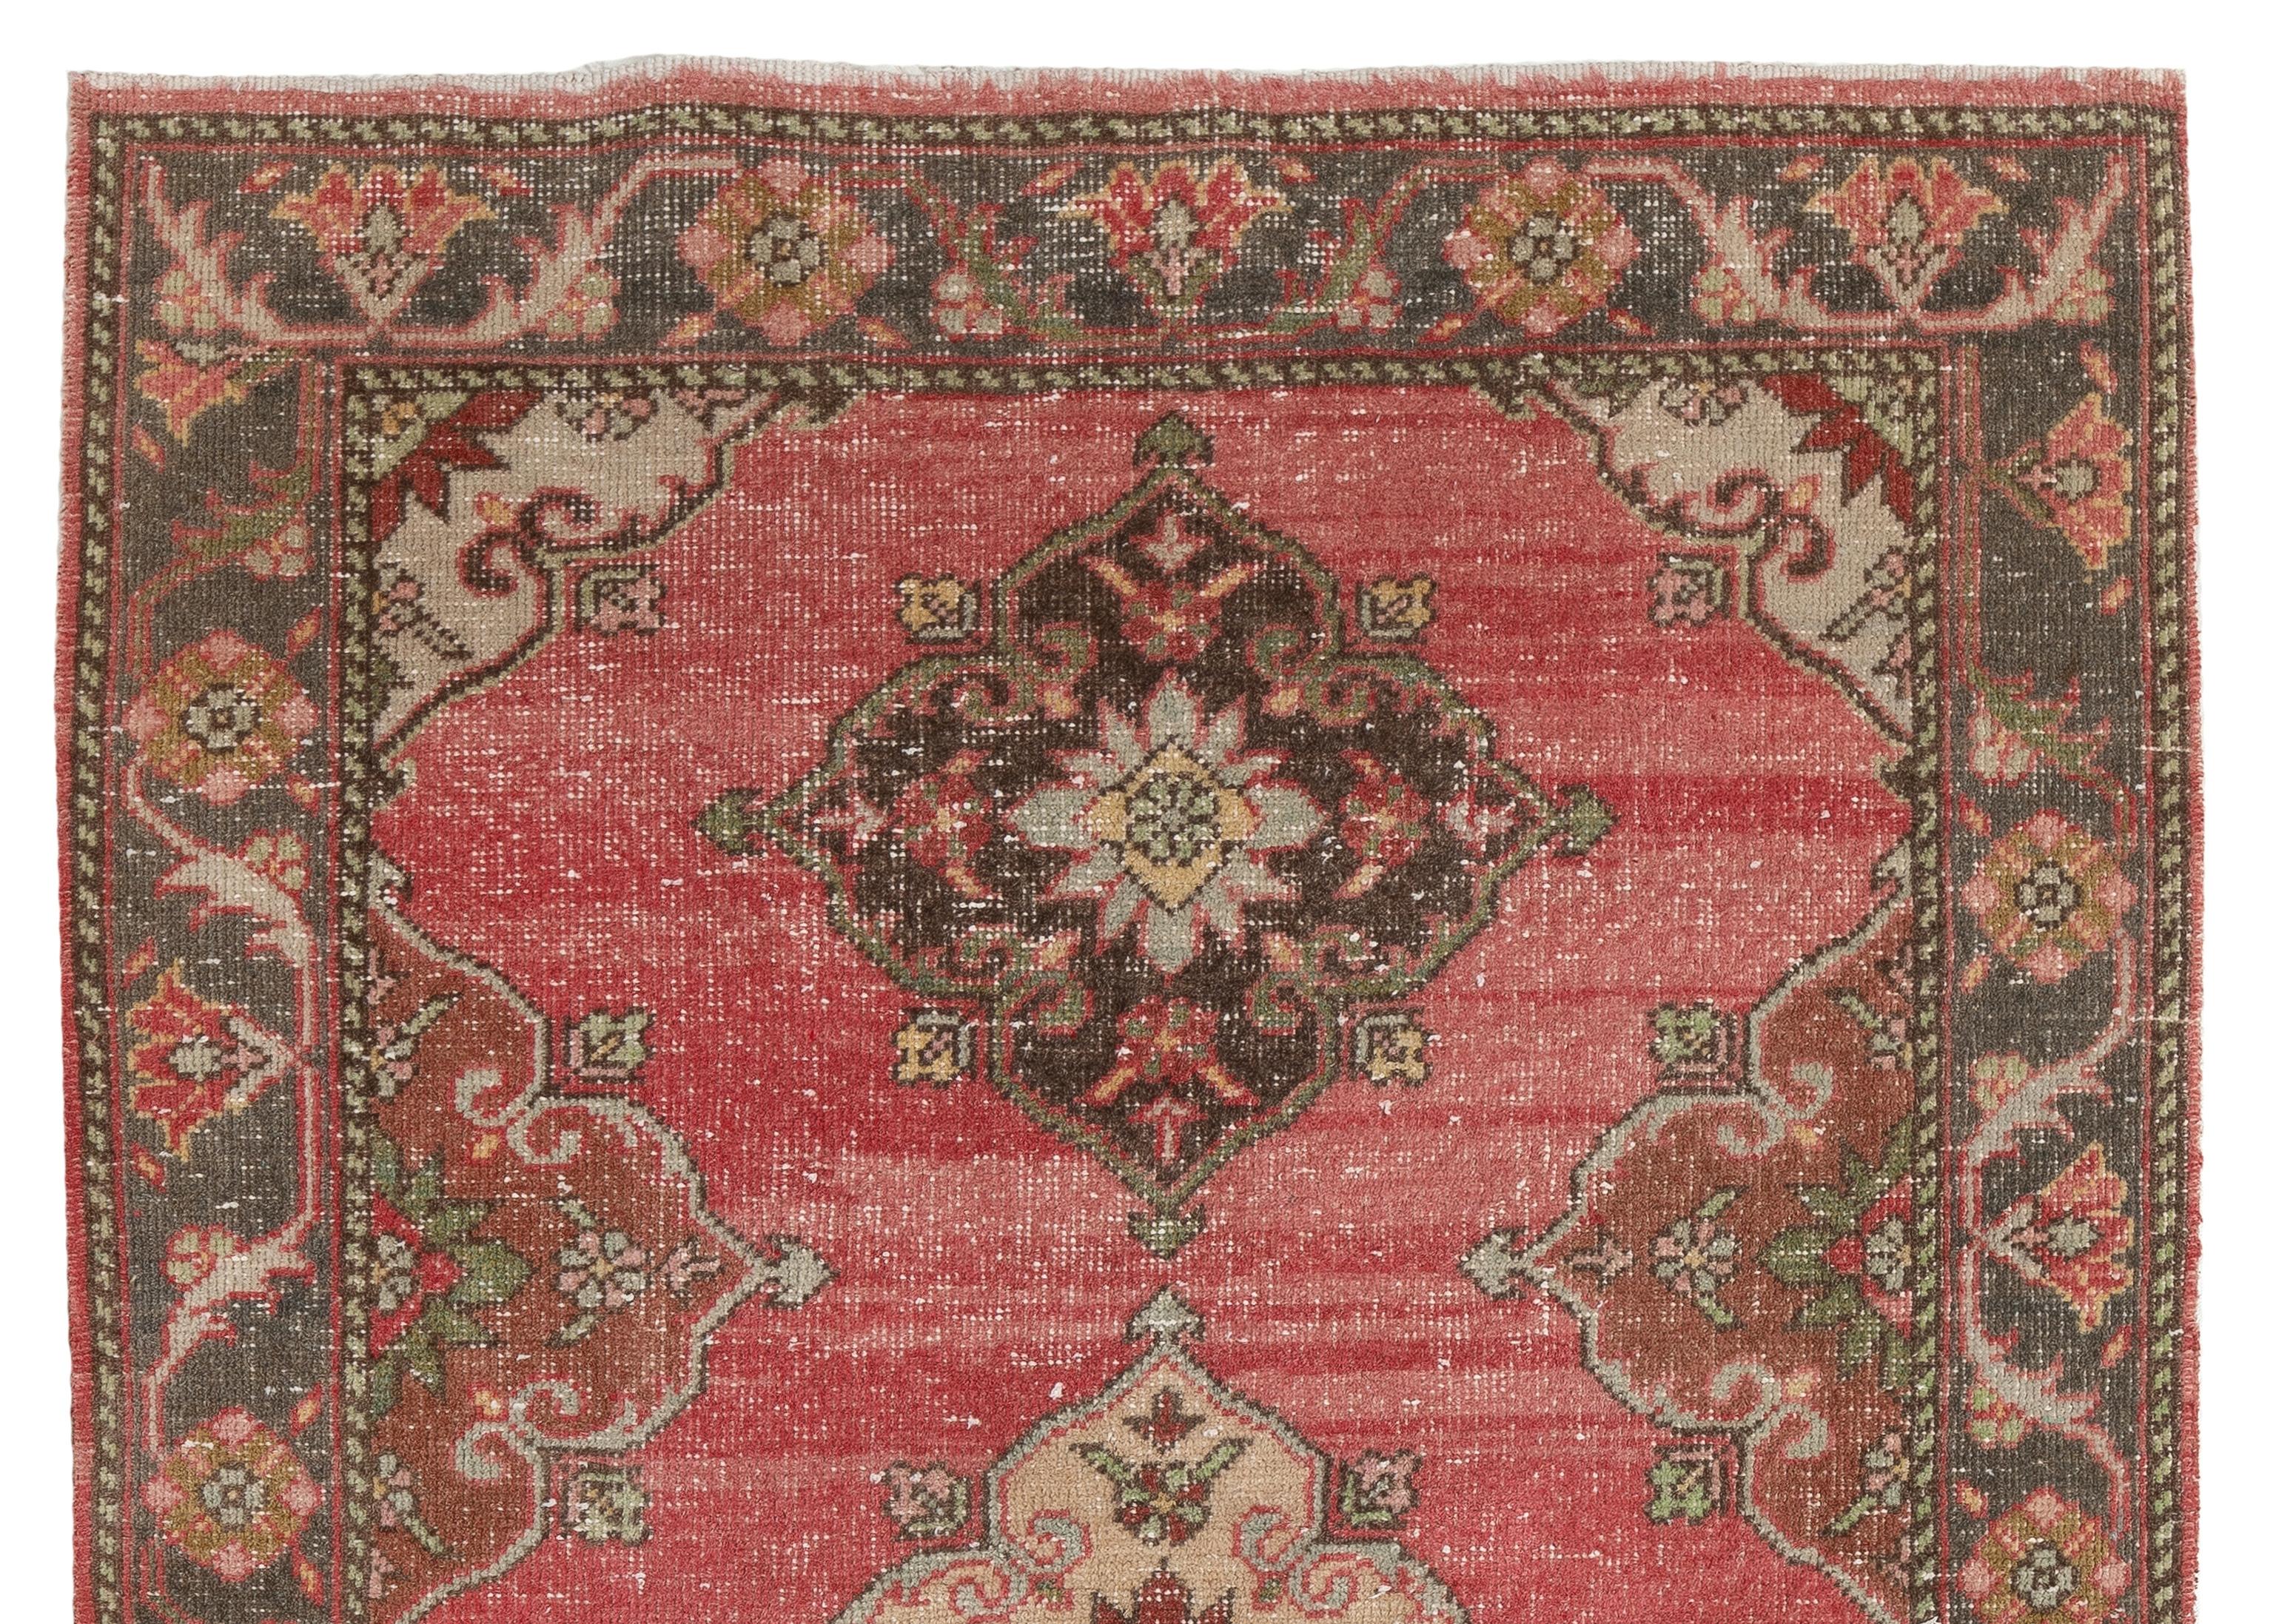 A finely hand-knotted vintage Turkish rug made in the 1960s with multiple full and half medallions in pale yellow, dark terra cotta red, charcoal grey against a red field. The rug has even low wool pile on cotton foundation. It is heavy and lays